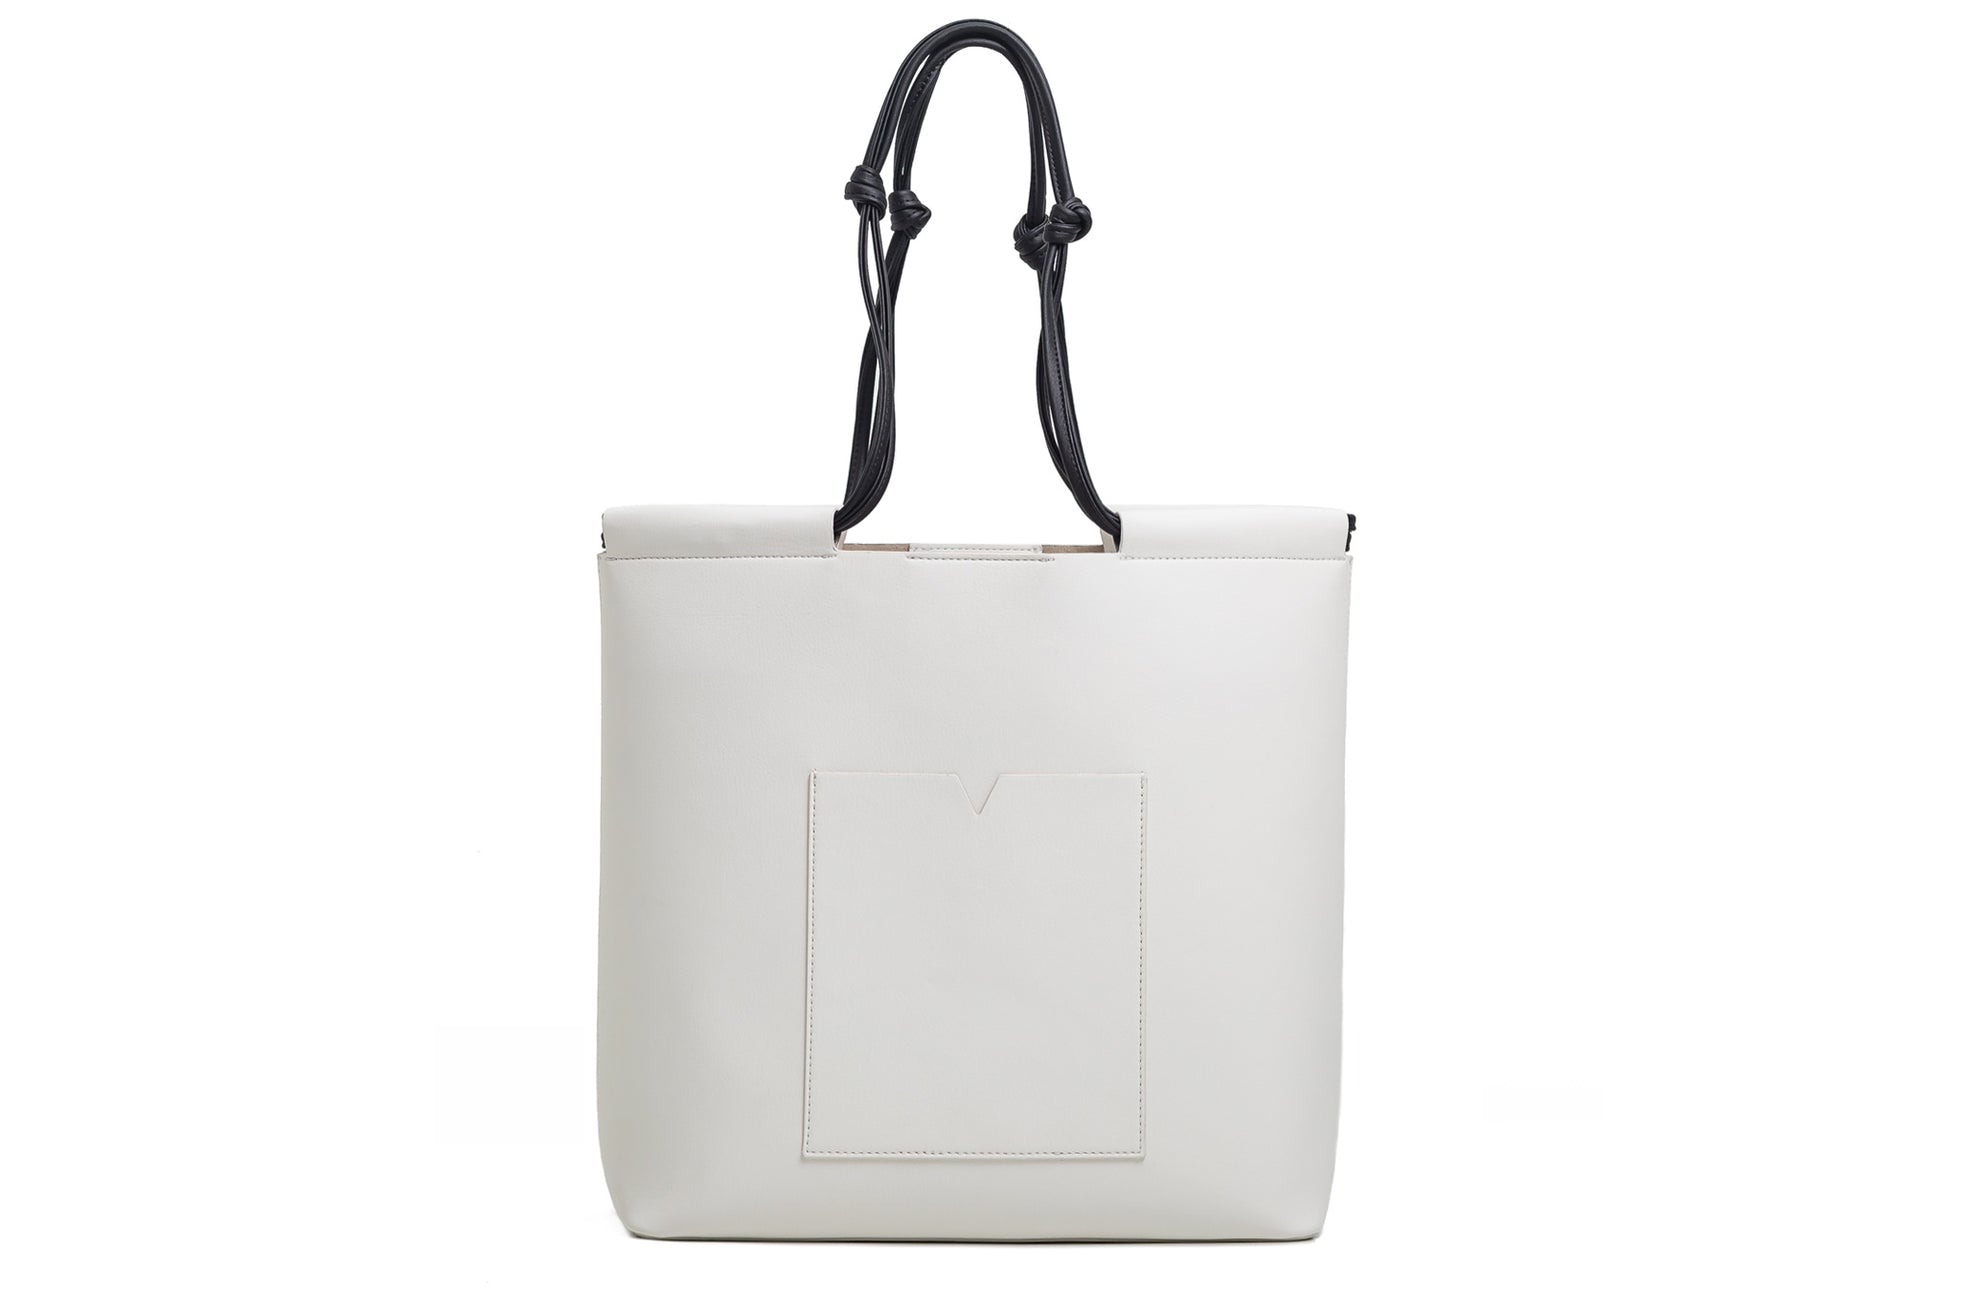 The Market Tote in Technik-Leather in White and Black image 1